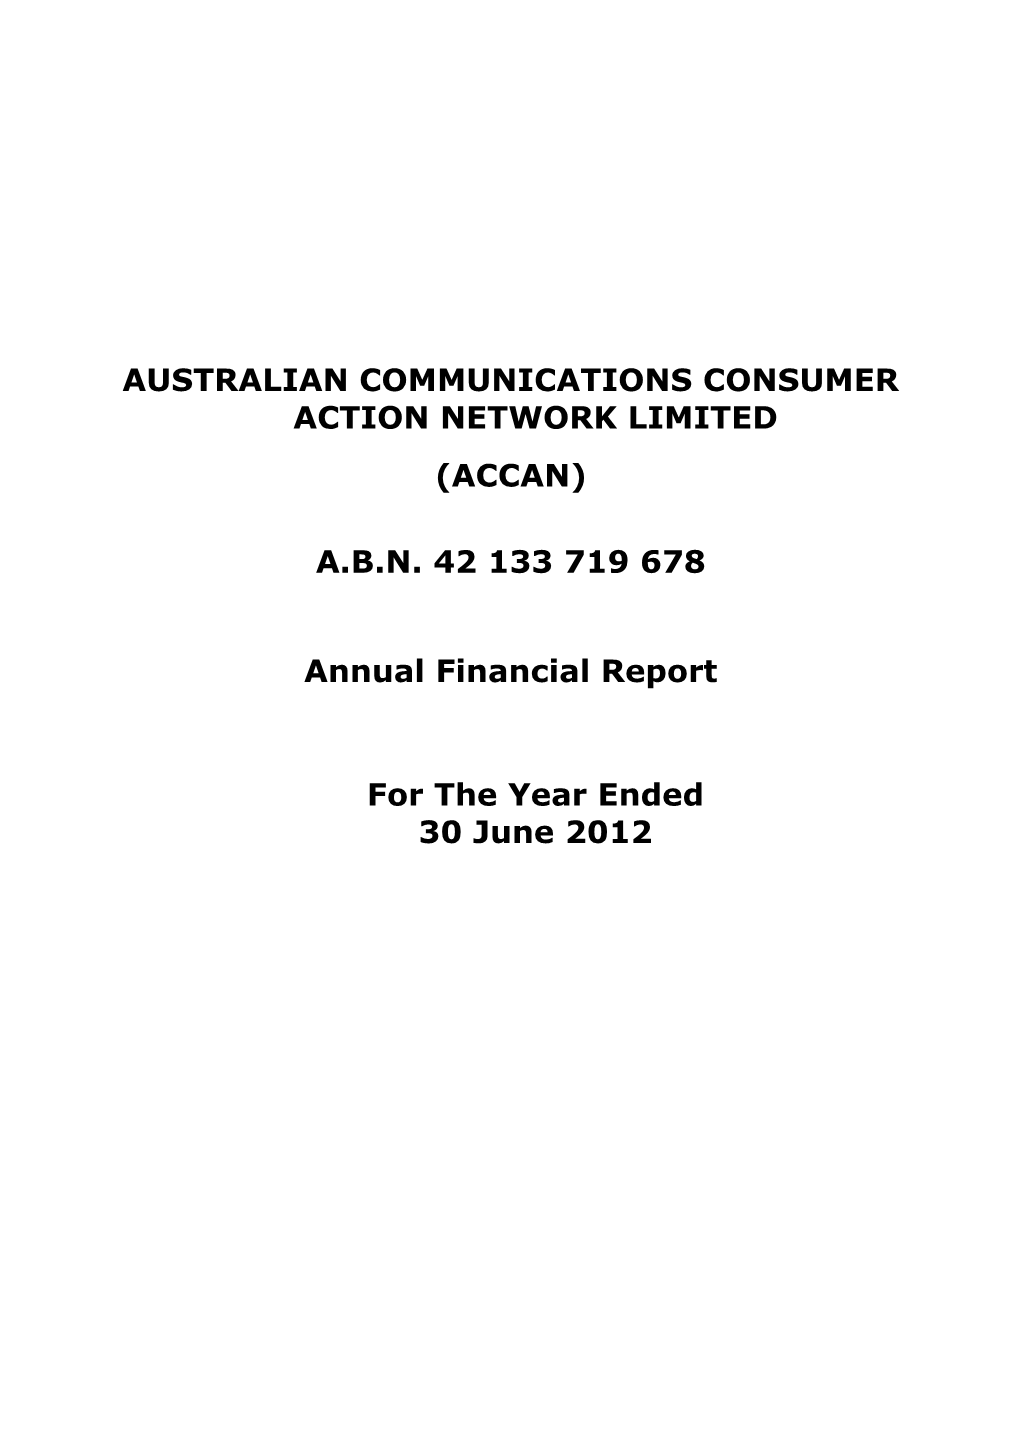 Australian Communications Consumer Action Network Limited